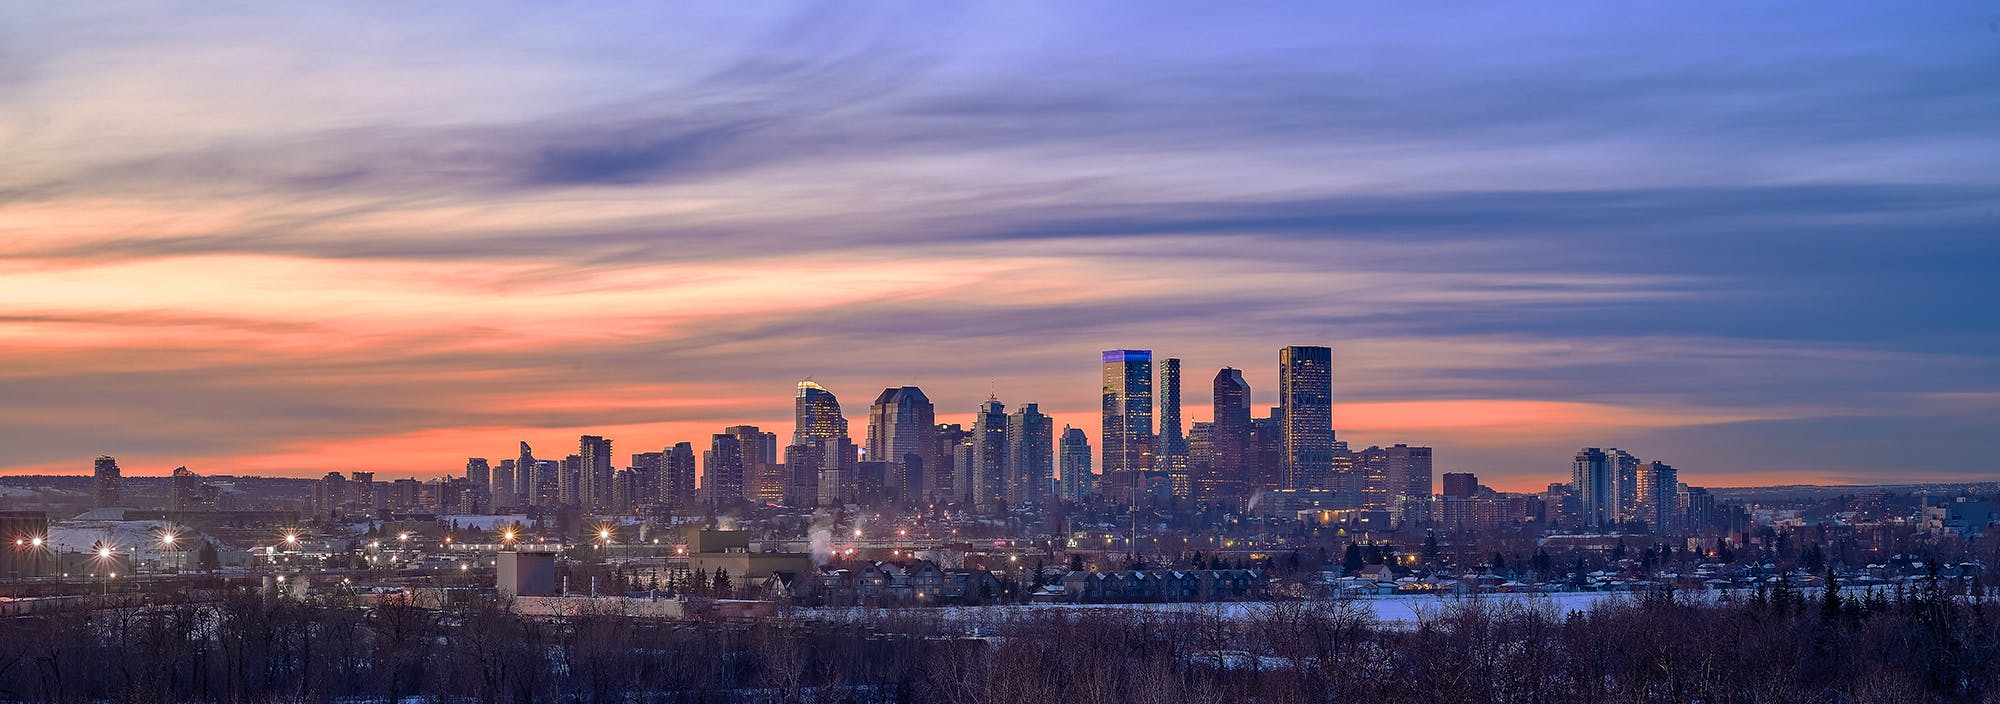 Wide view of the Calgary skyline at sunset.